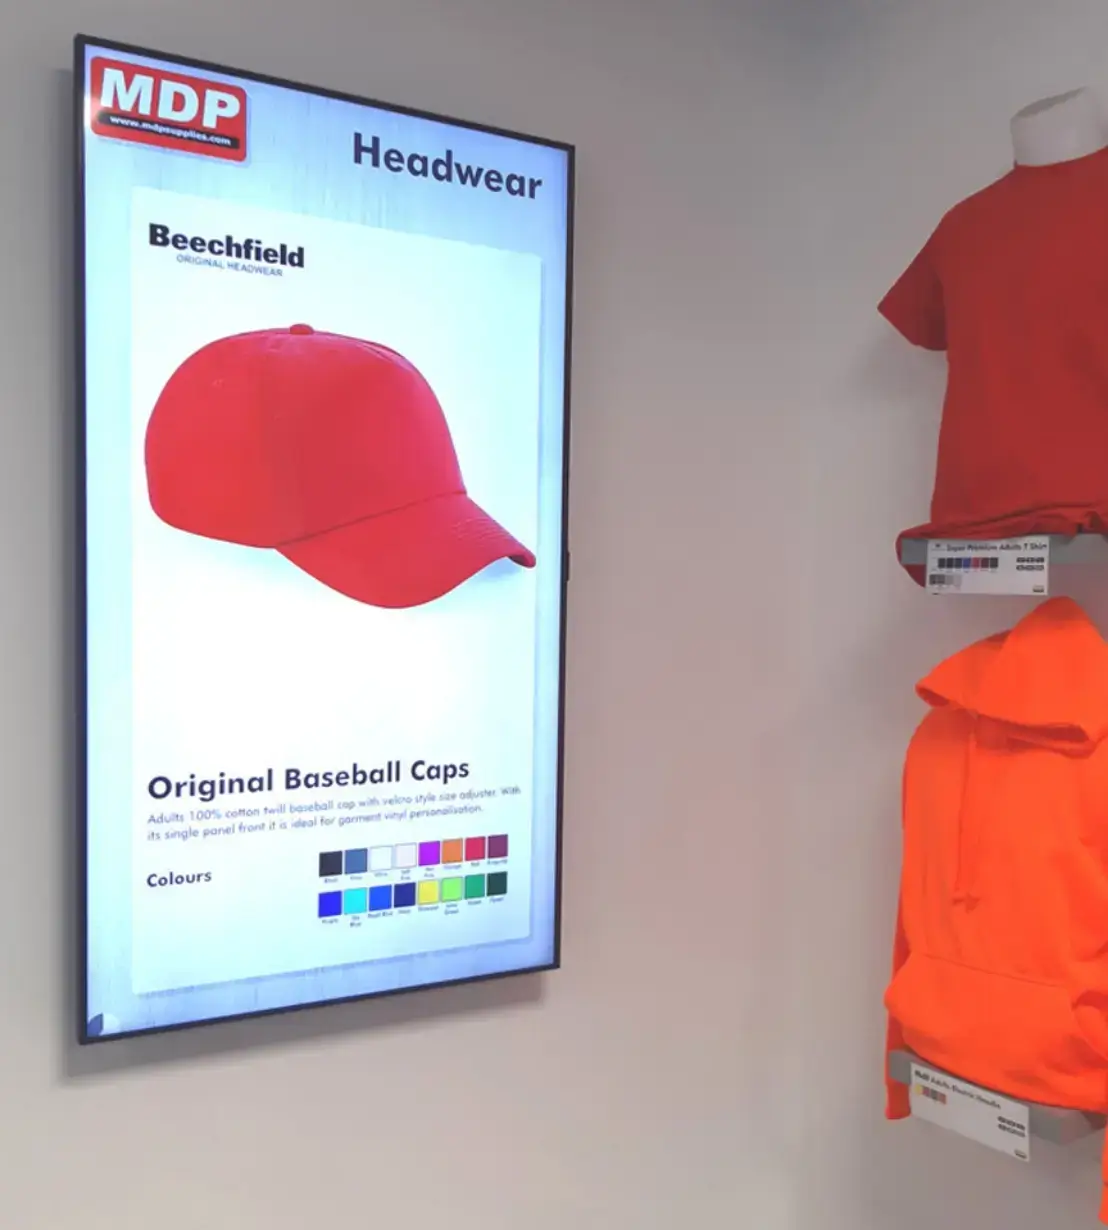 Digital signage content playing on a display at a clothing store which is powered by Pickcel